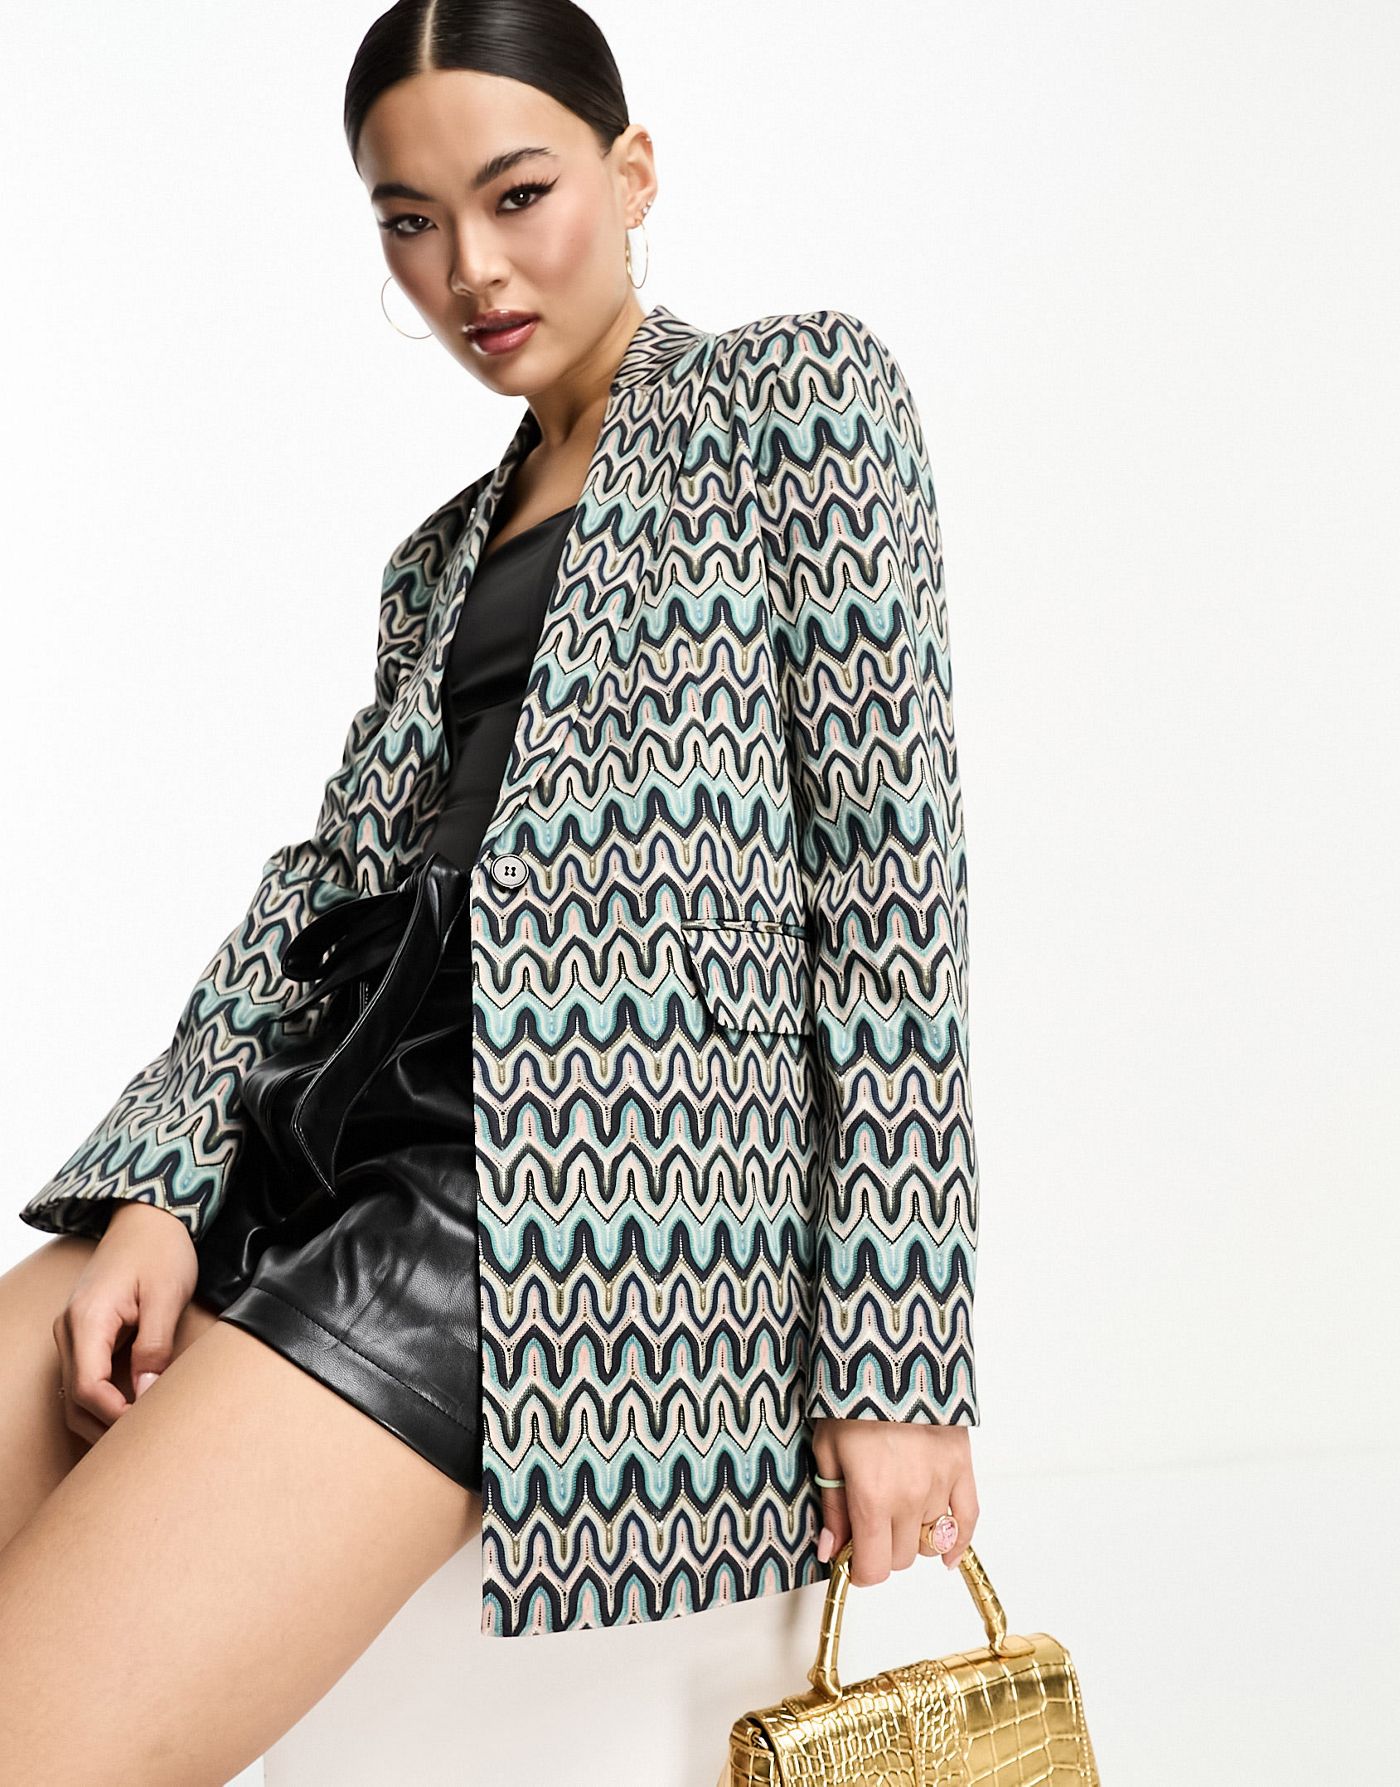 Twisted Tailor bonded lace suit jacket in multi